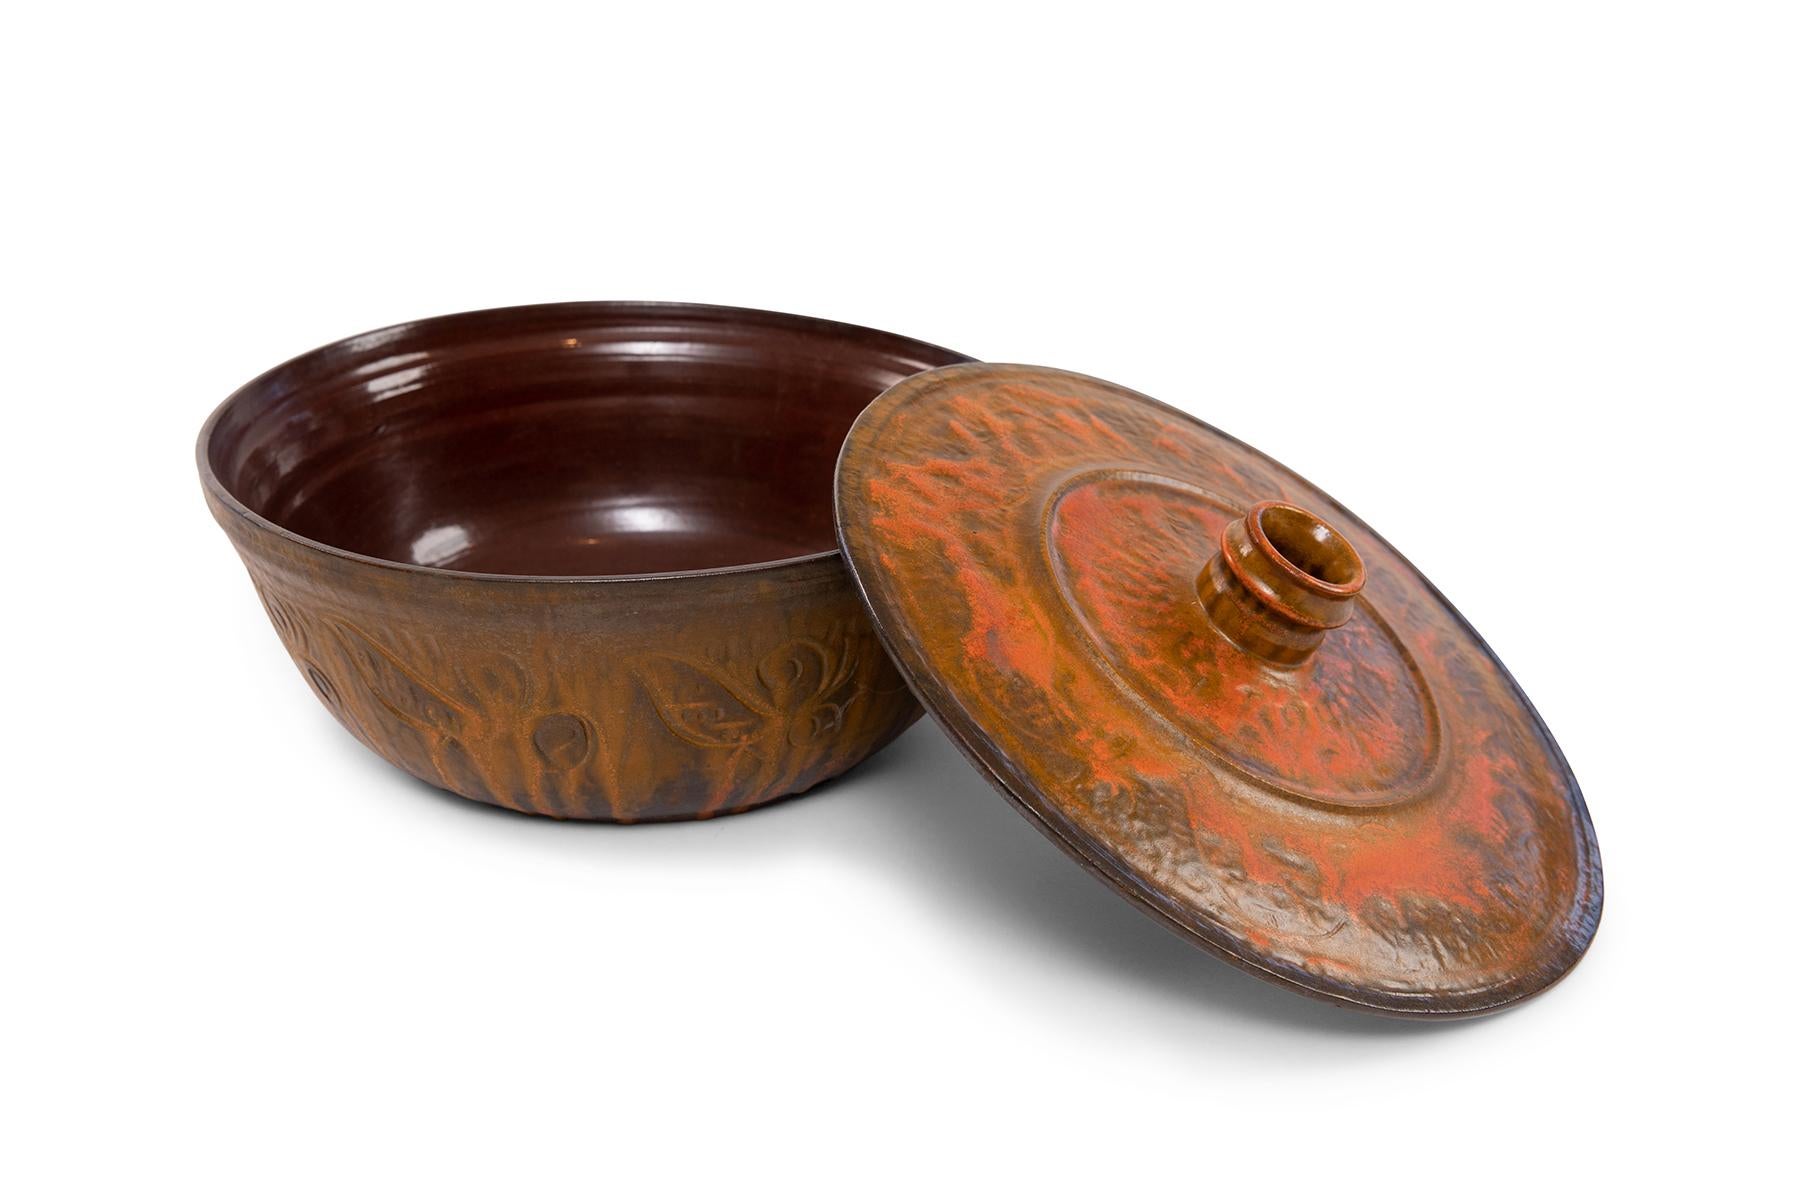 Large Rose Cabat lidded bowl circa early 1960s. This example has yellow hues and reddish earthy undertones. Signature can be found on the bottom of the bowl.